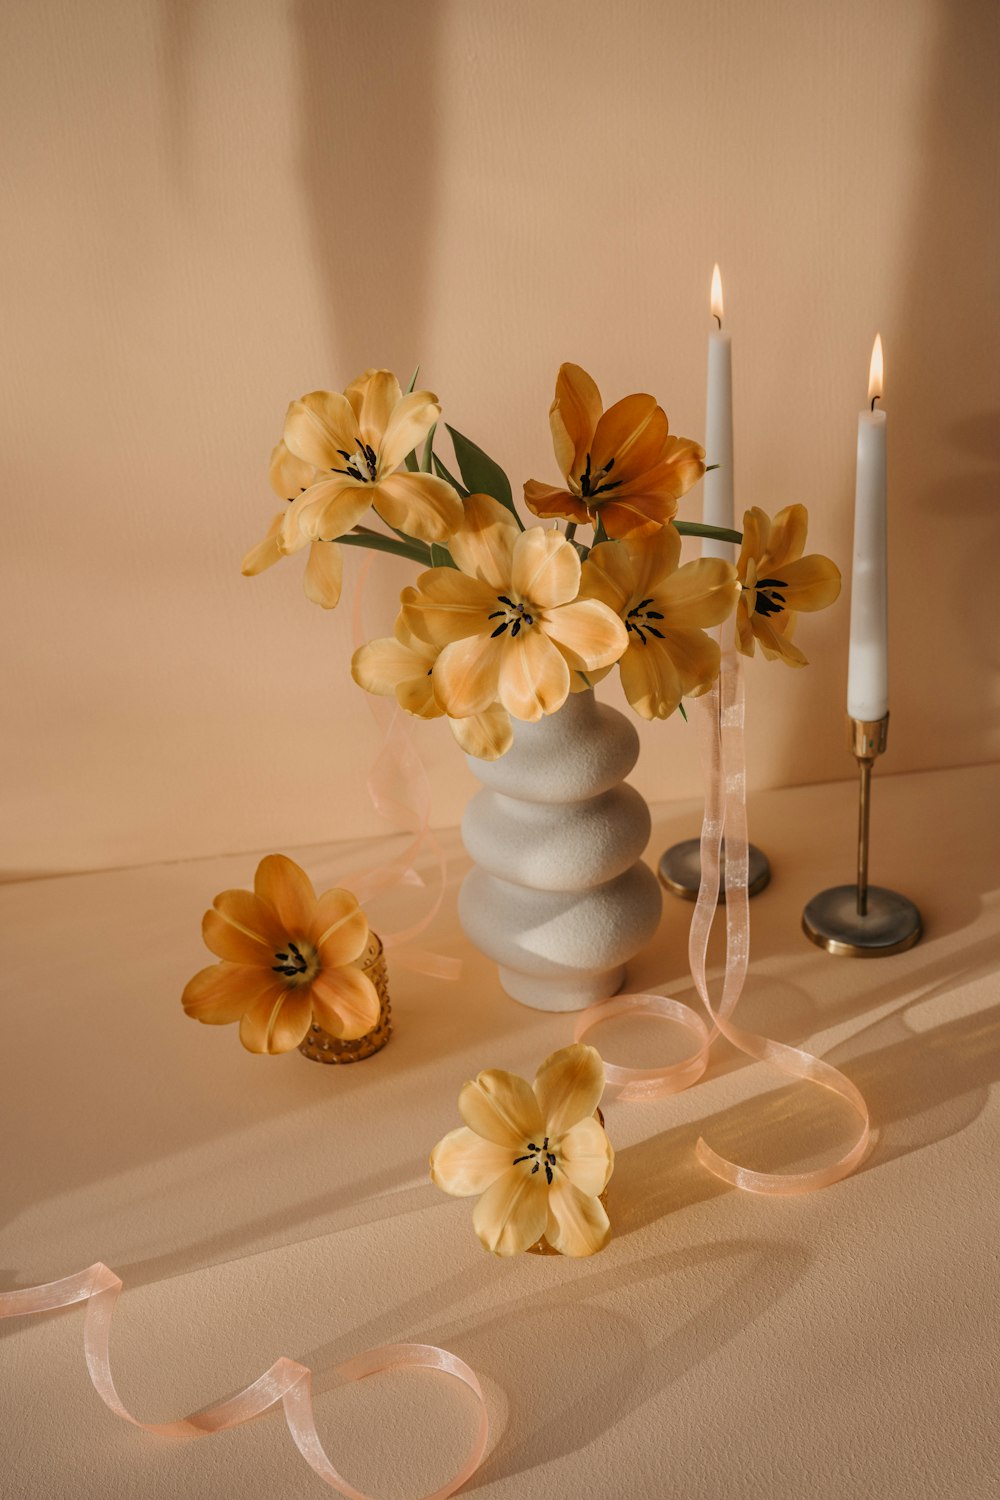 a vase filled with yellow flowers next to two candles